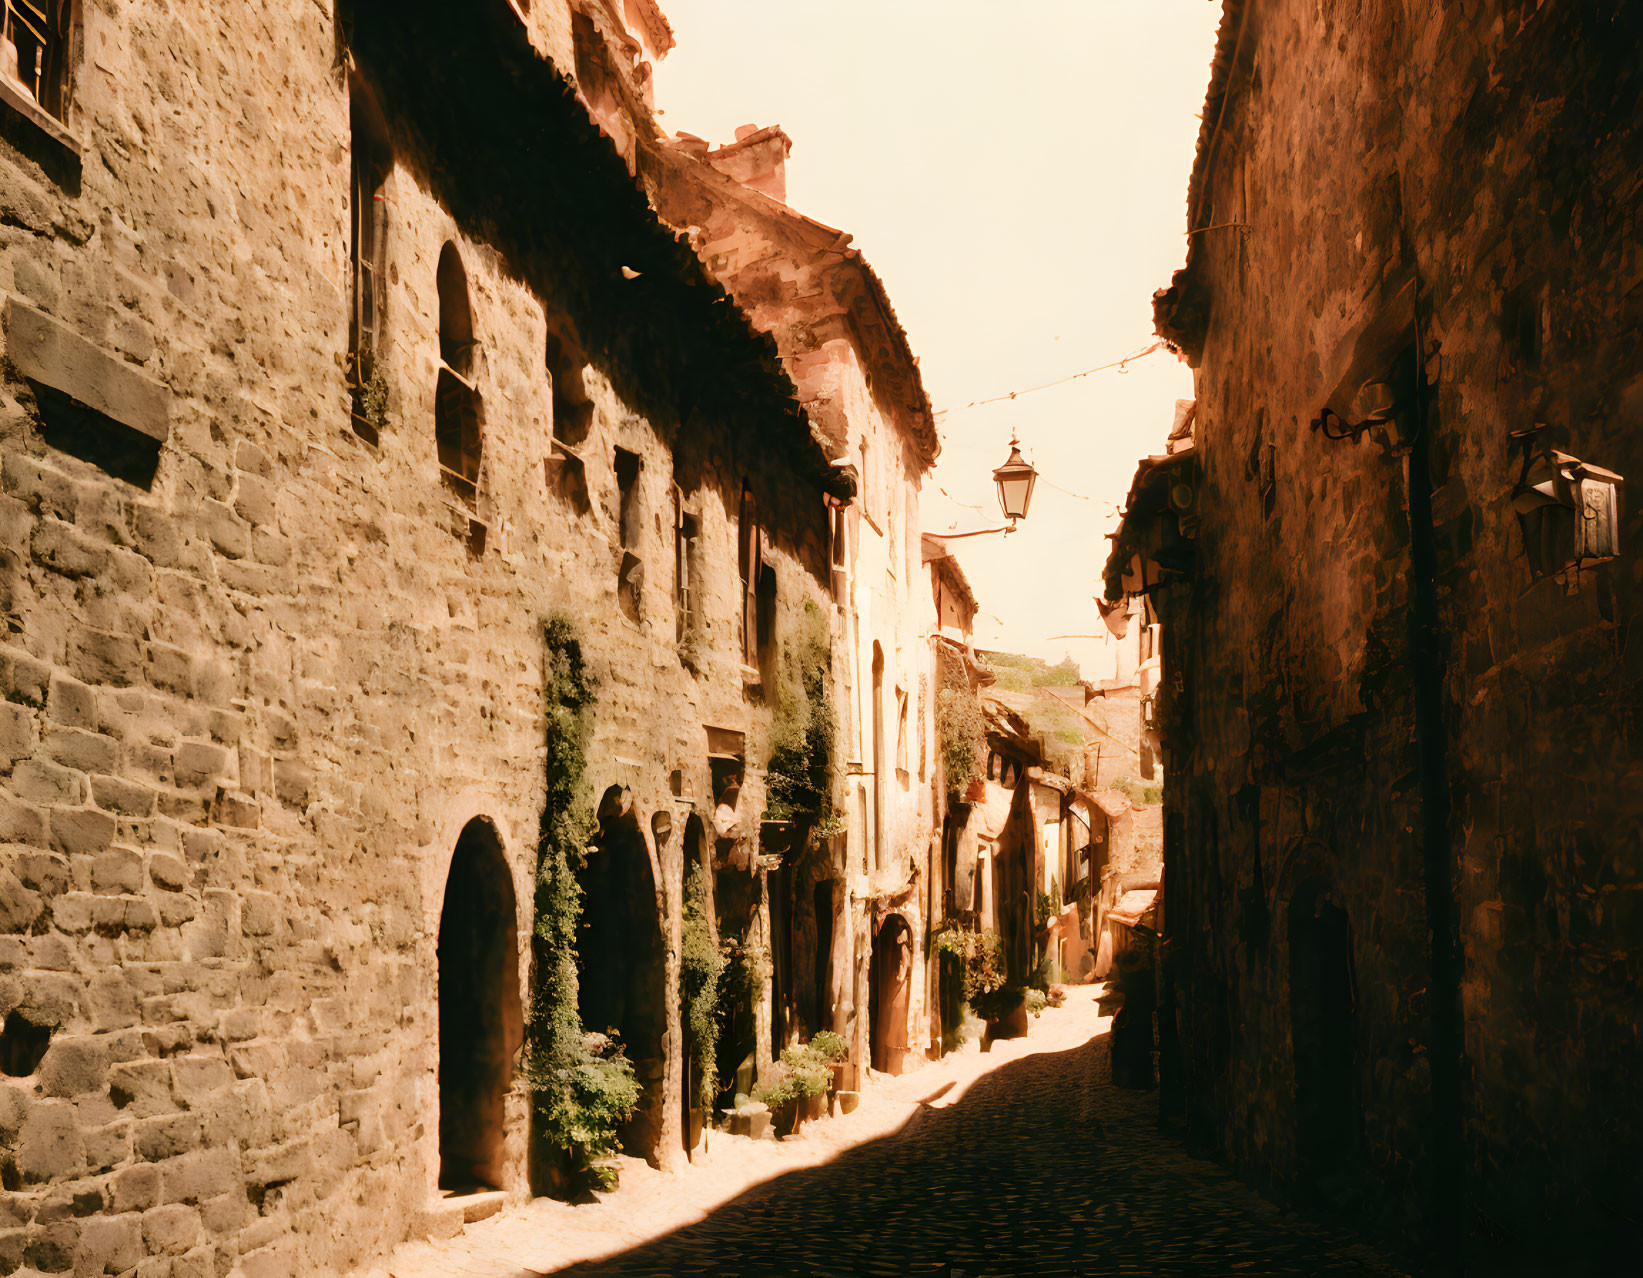 Historic cobblestone street in old European town with hanging lamps